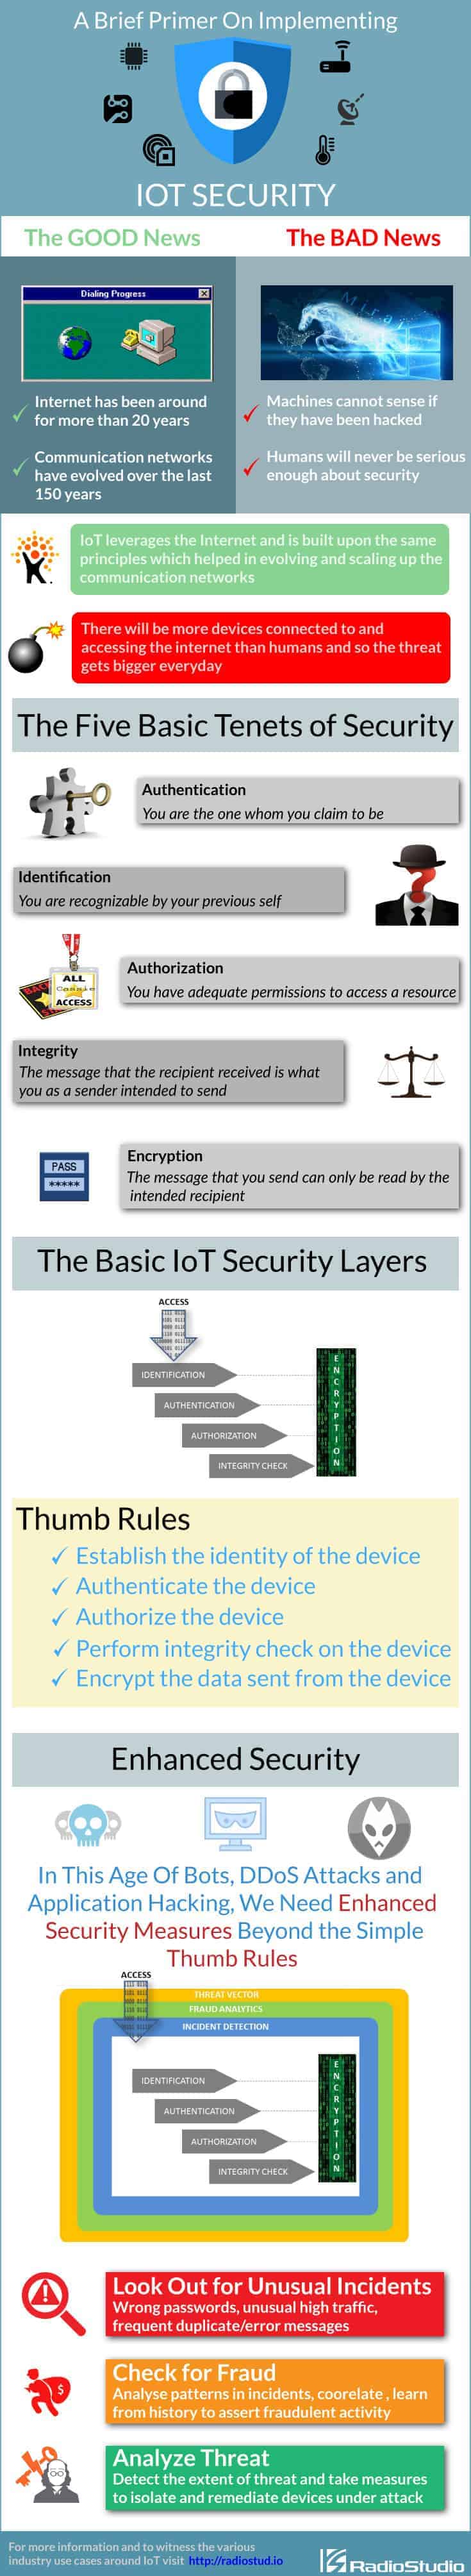 Brief Primer on Implementing IoT Security